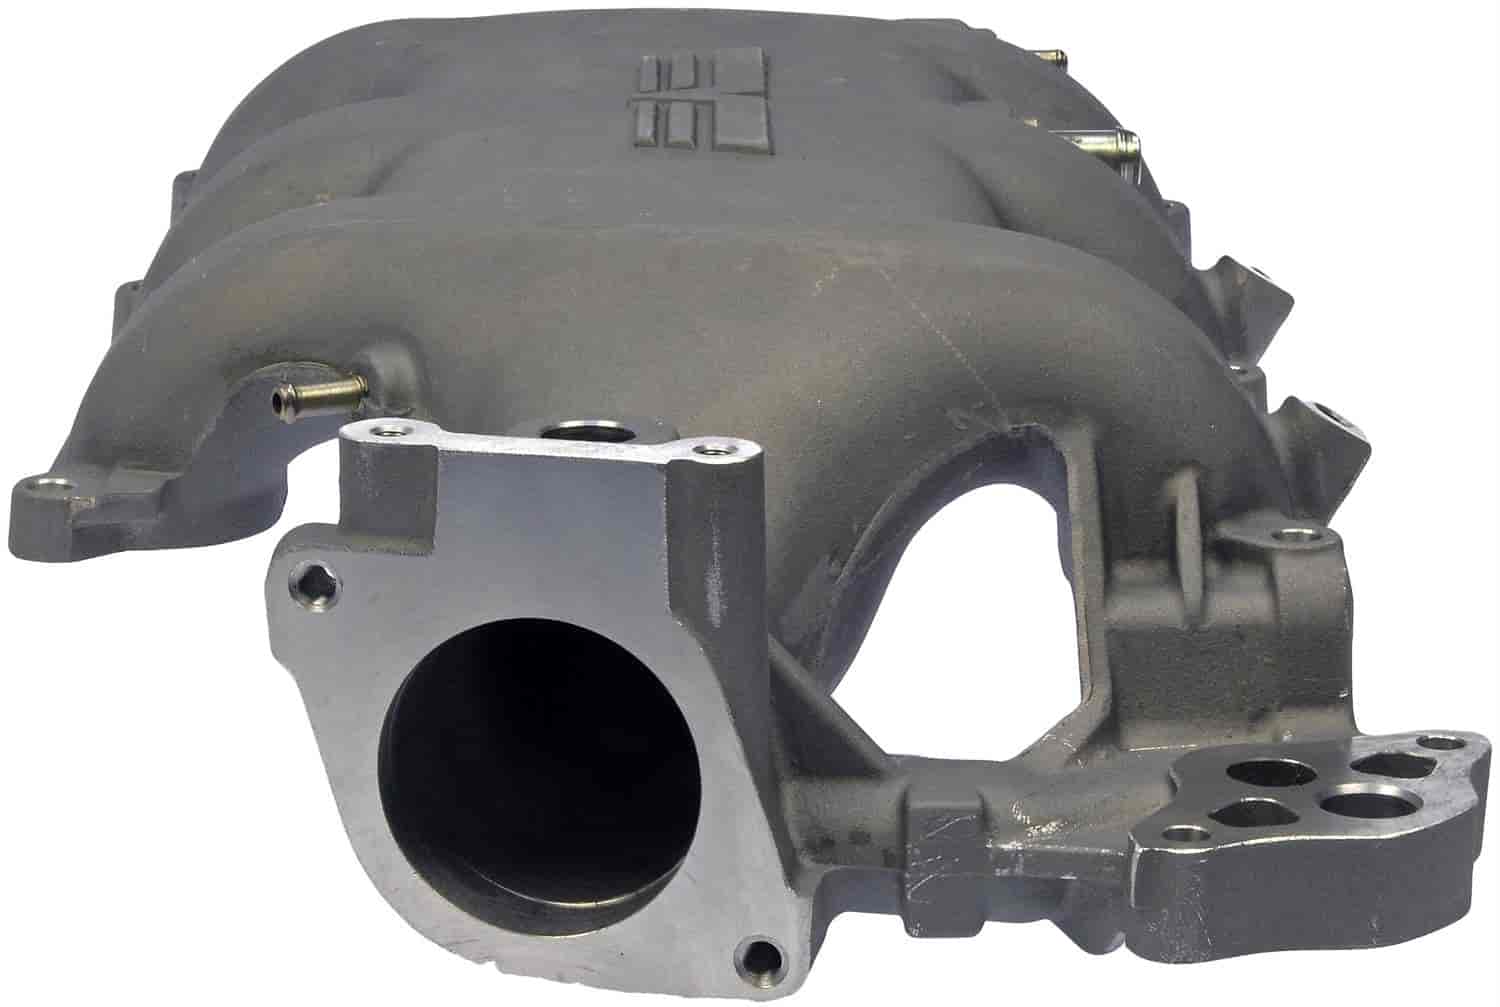 Upper Aluminum Intake Manifold - Includes Gaskets